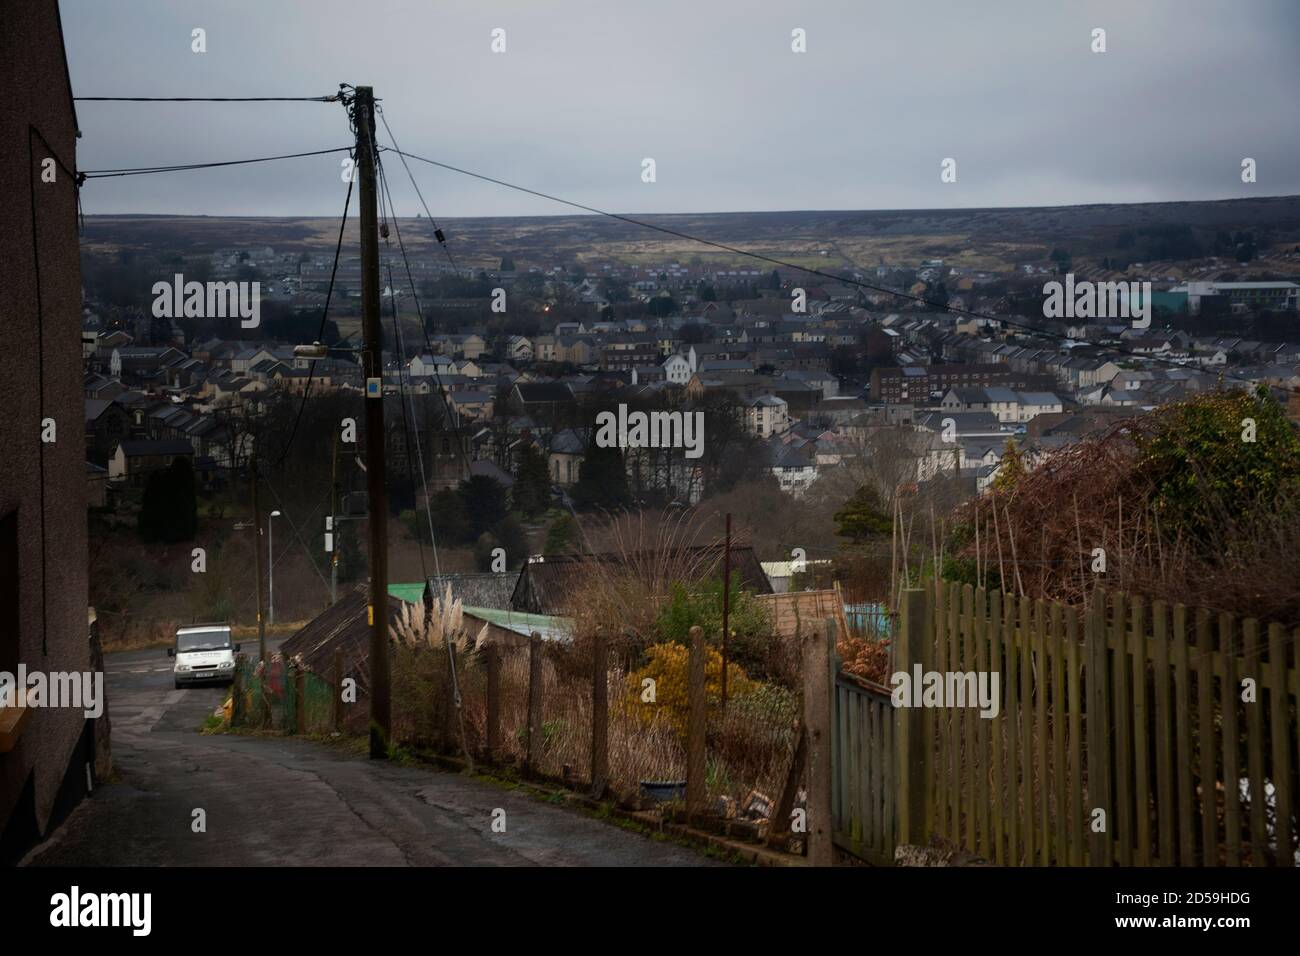 A view looking across the town of Blaenavon and the UNESCO World Heritage Site of Blaenavon Industrial Landscape, South Wales, United Kingdom Stock Photo